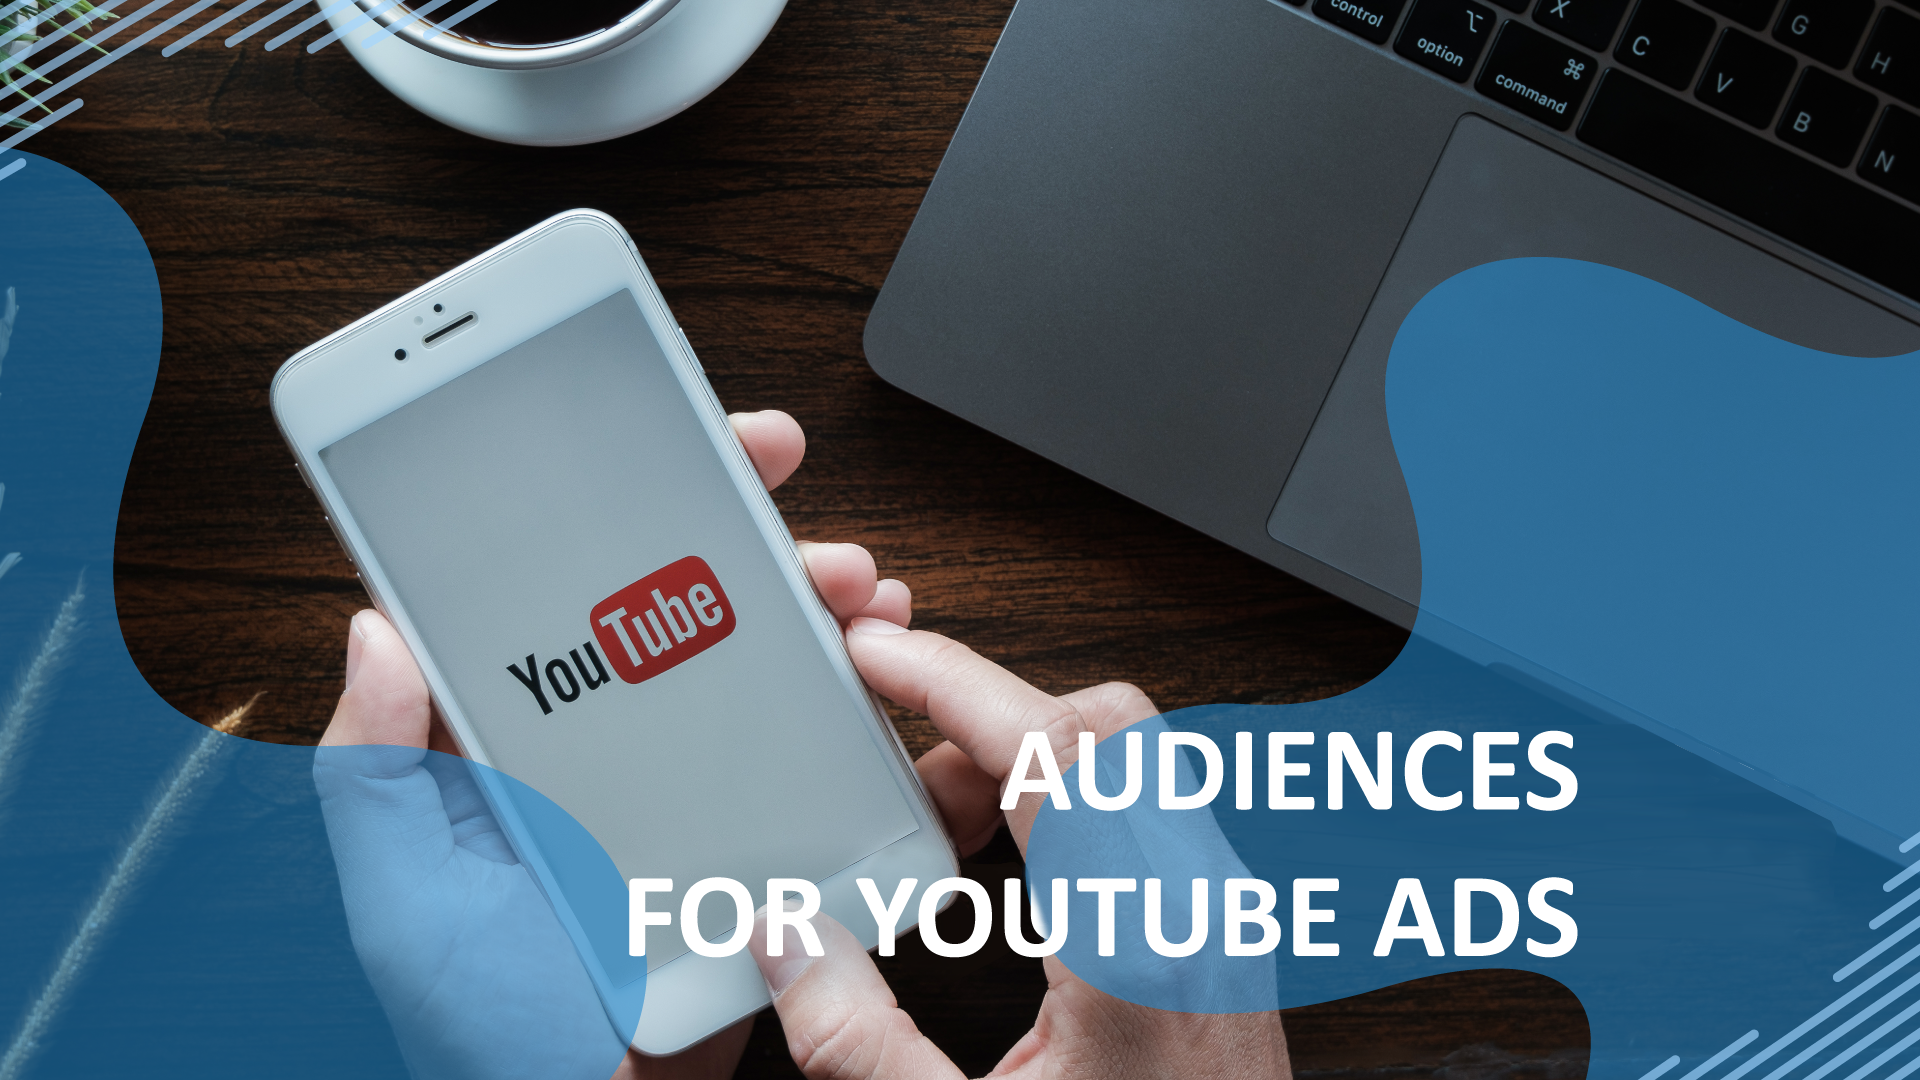 Audiences for YouTube advertising